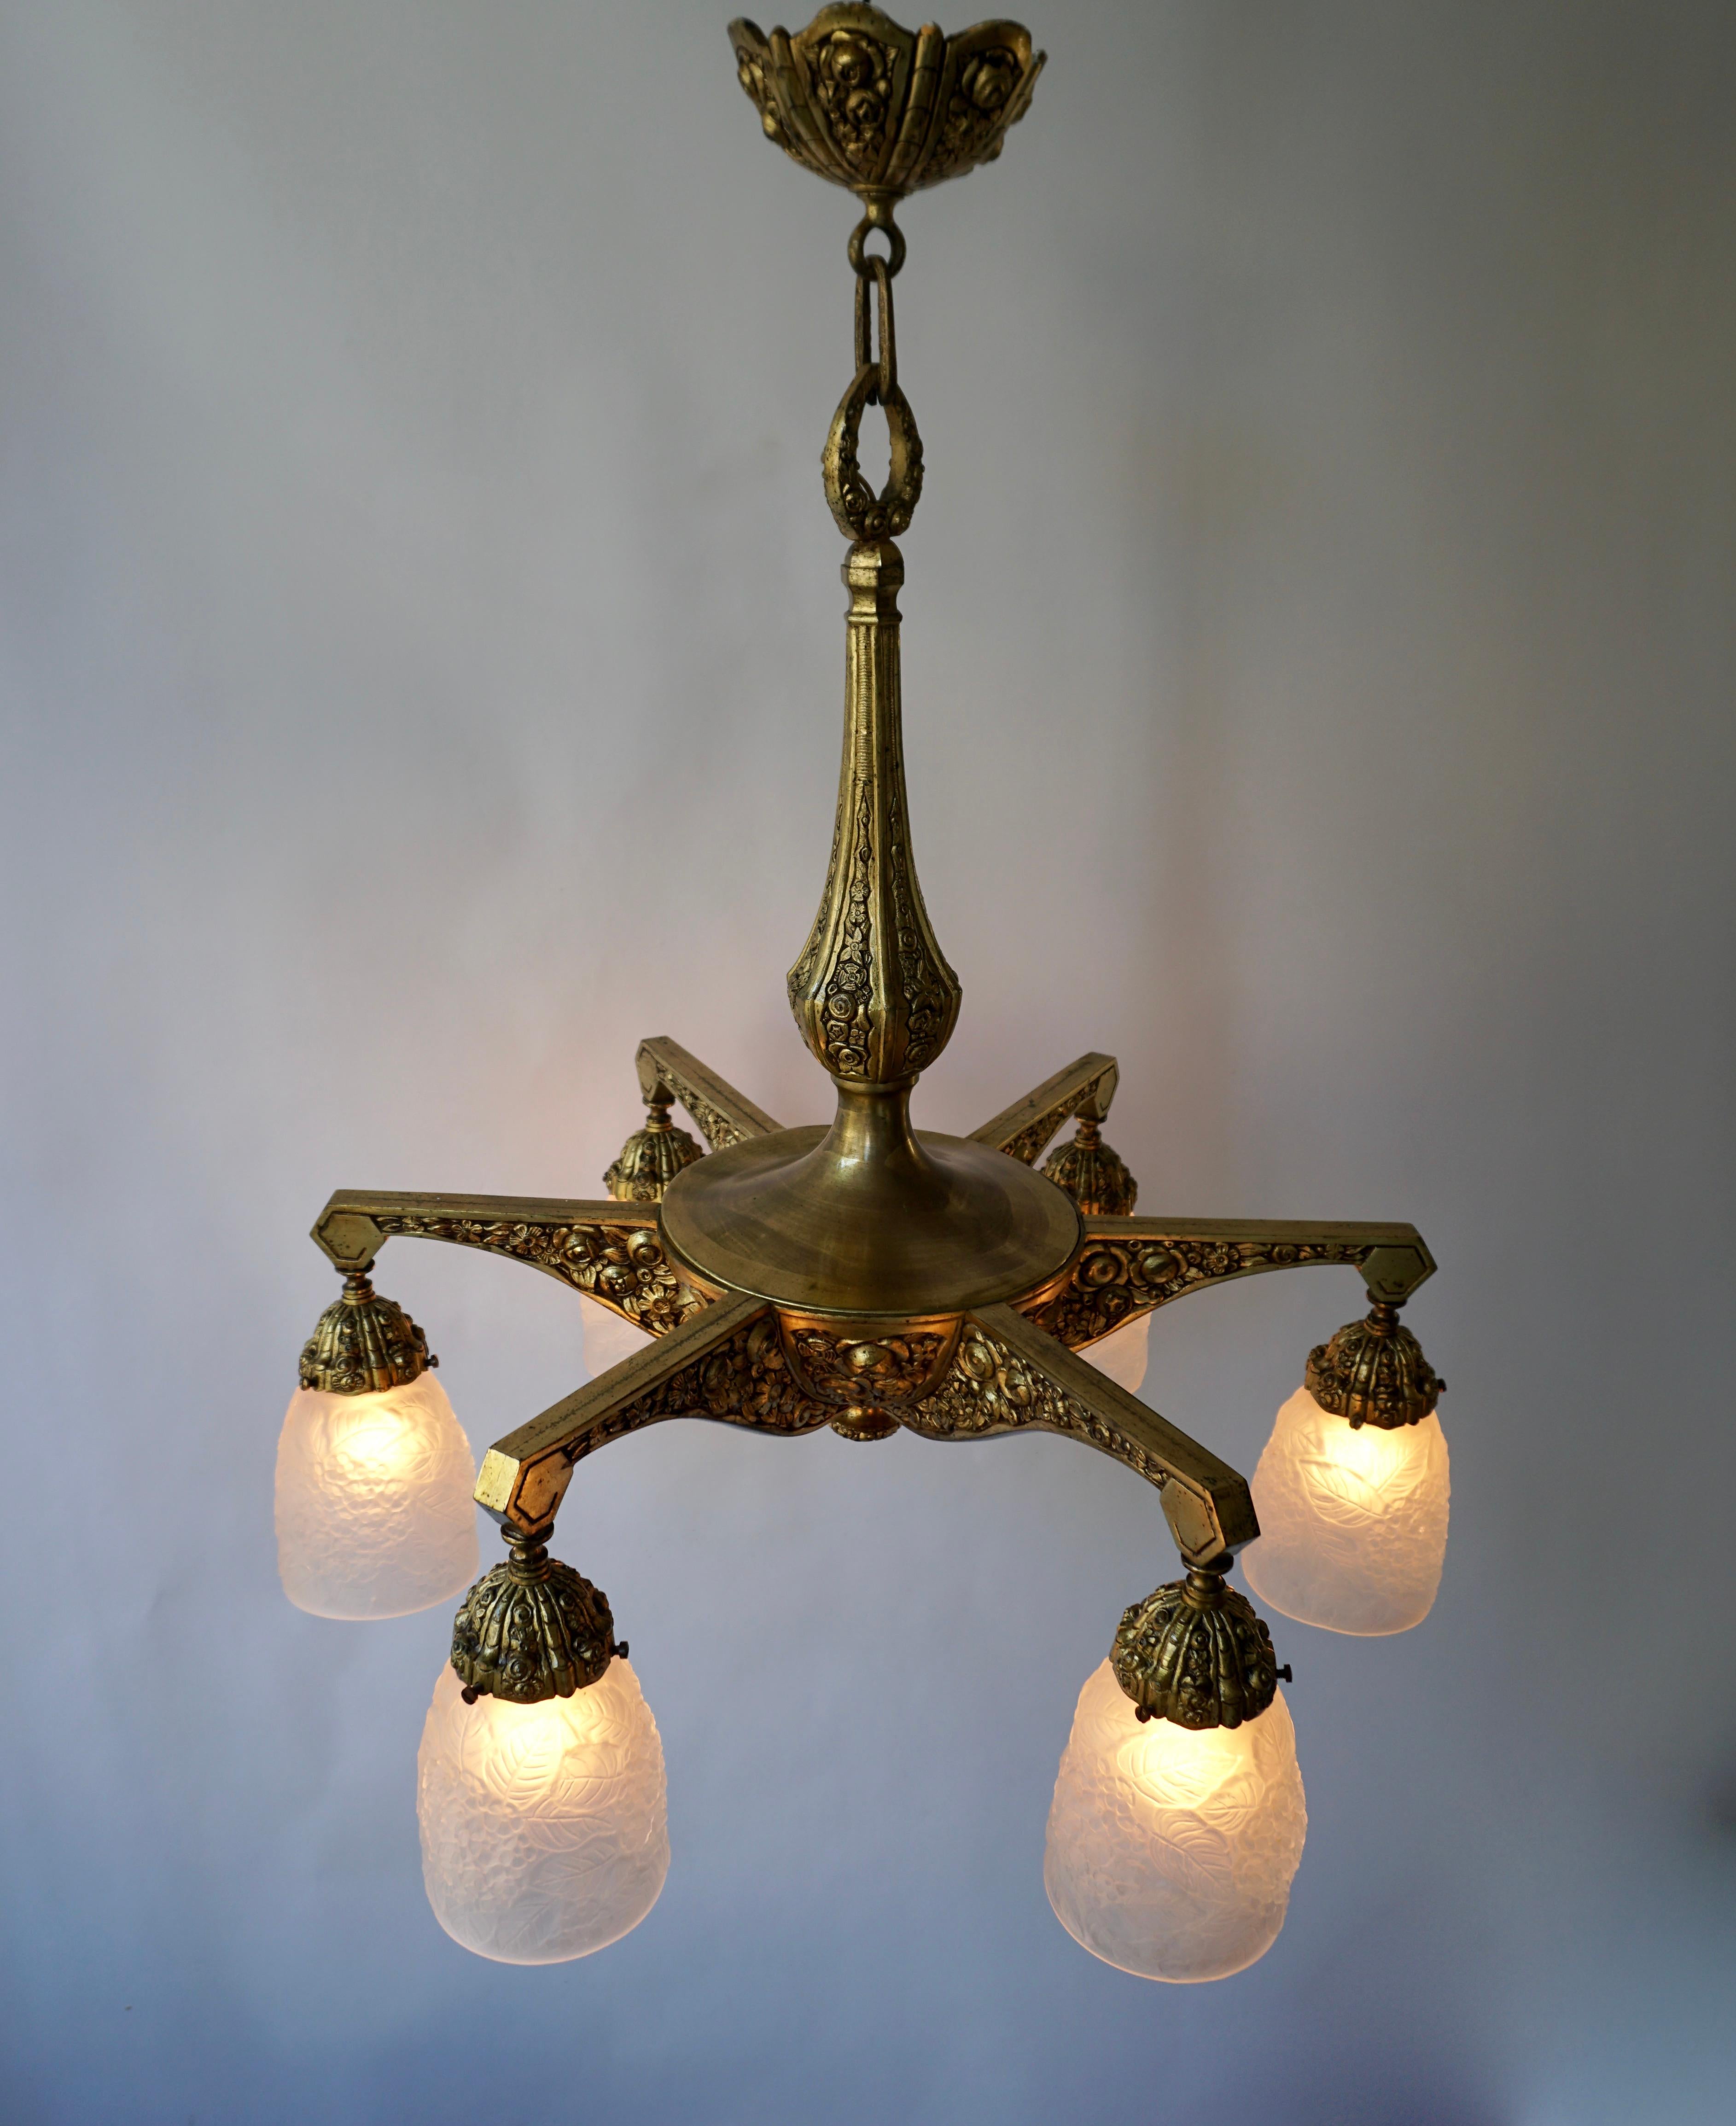 French Art Deco style bronze chandelier with floral motifs from the 1930s. Six bronze arms, each with frosted glass shade and a socket for E 27 light bulb.
Measures: Diameter 60 cm.
Height fixture 60 cm.
Total height including the chain and